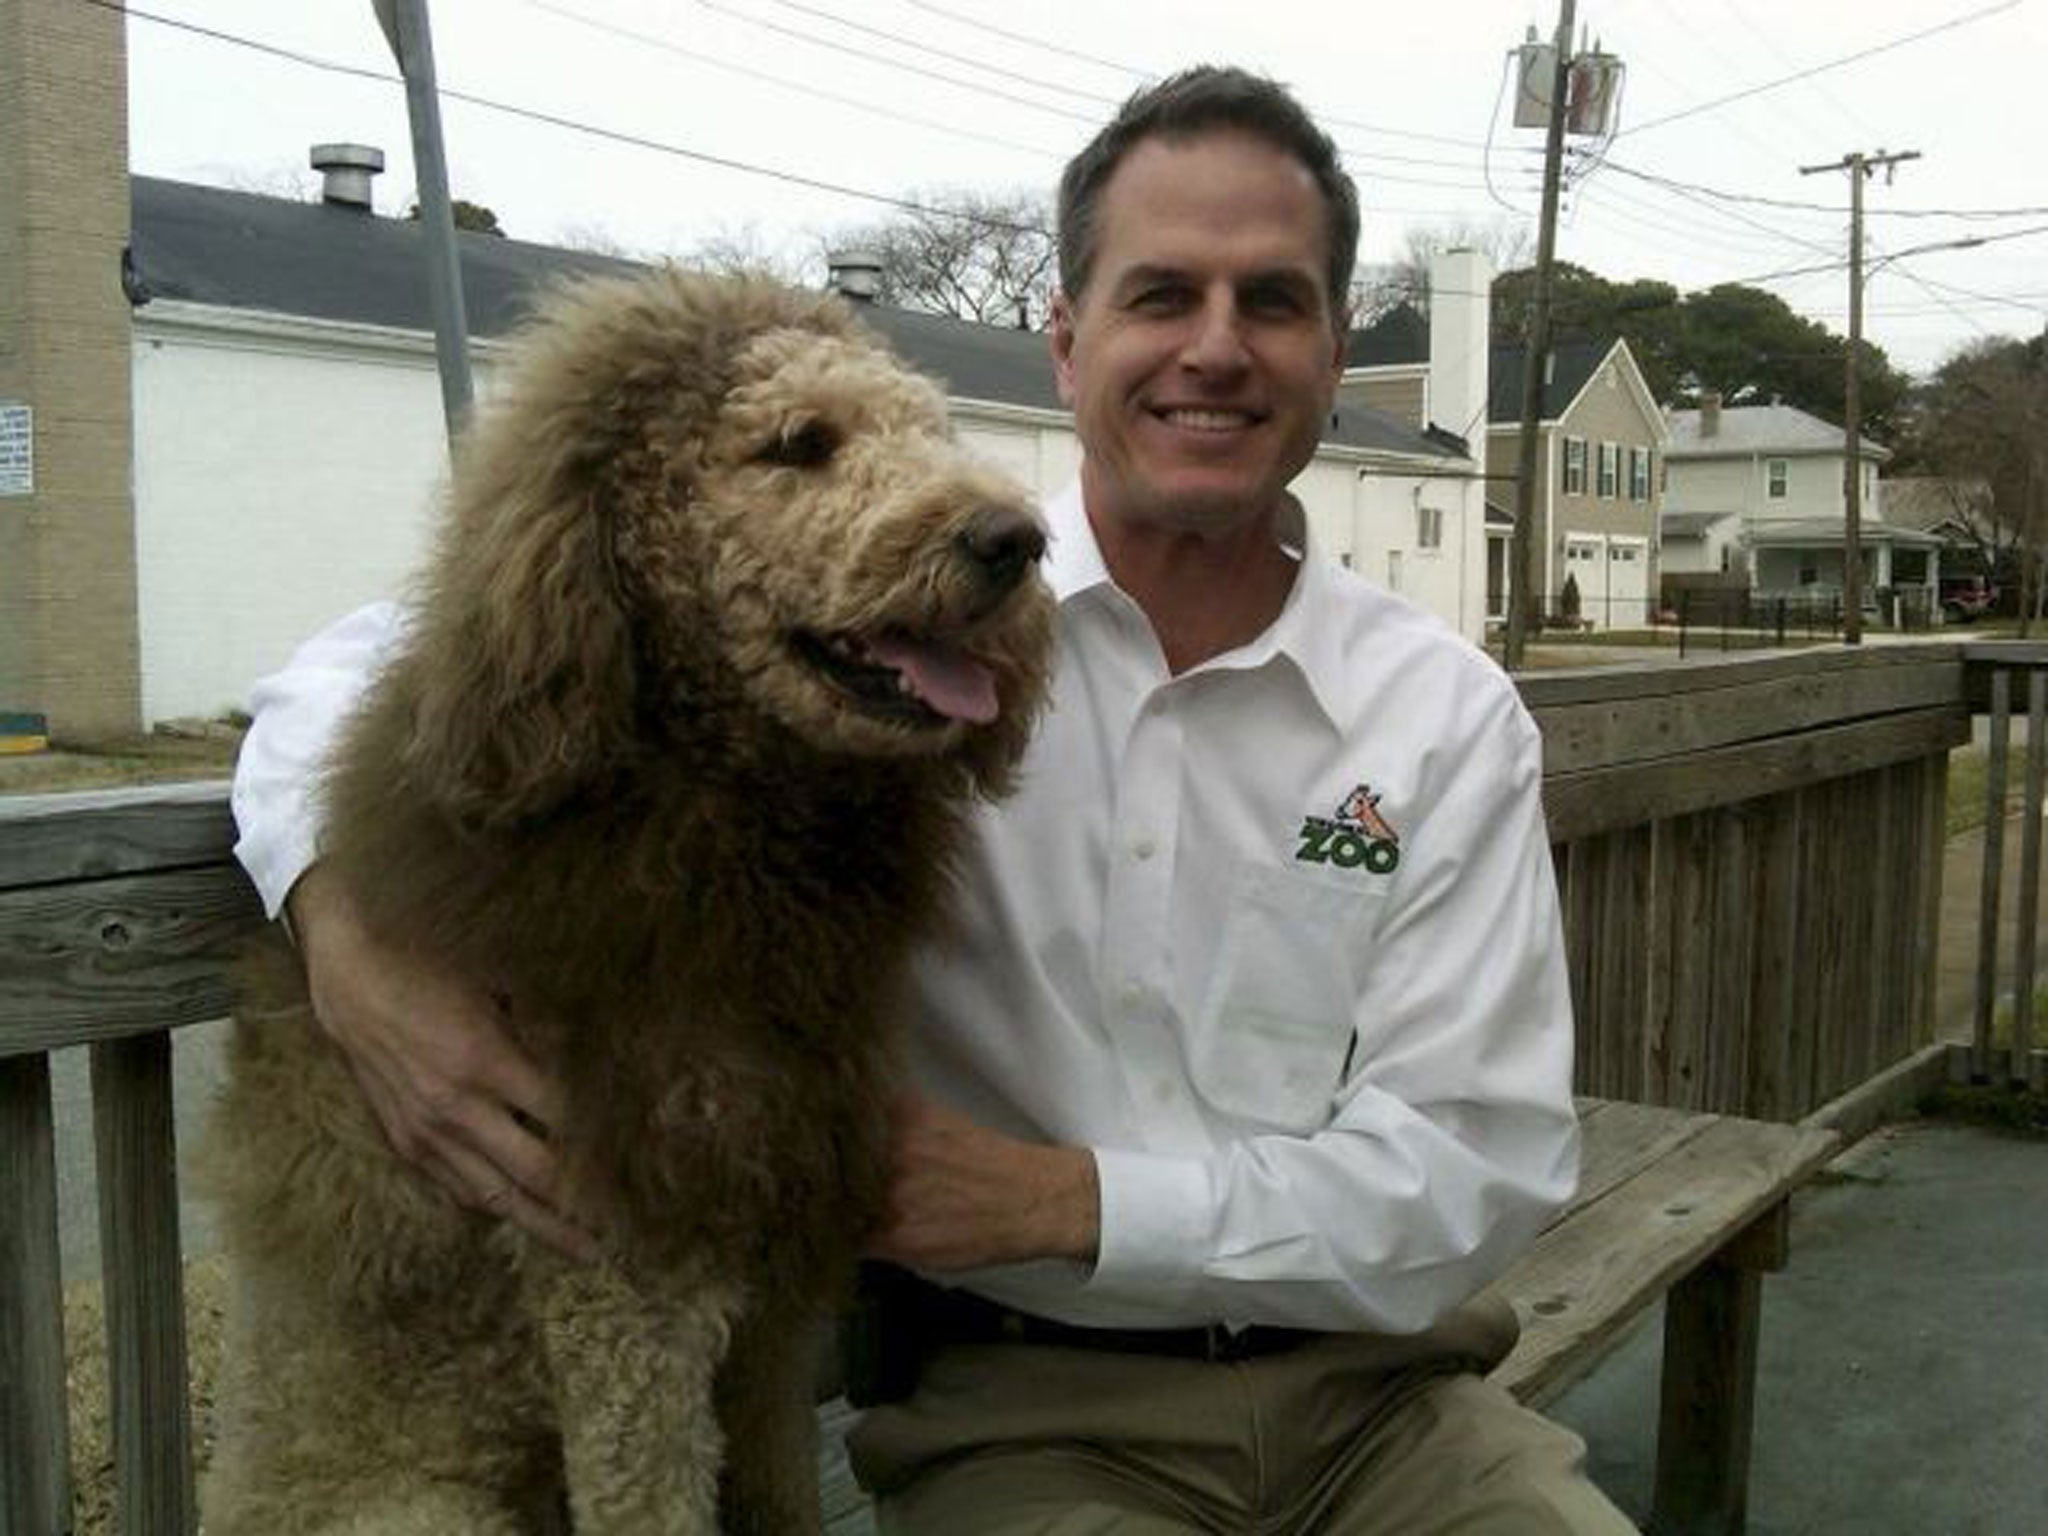 Virginia zoo's executive director Greg Brockheim with Charles the Monarch, a Labradoodle with a cut resembling the shaggy mane and tawny coat of a Lion